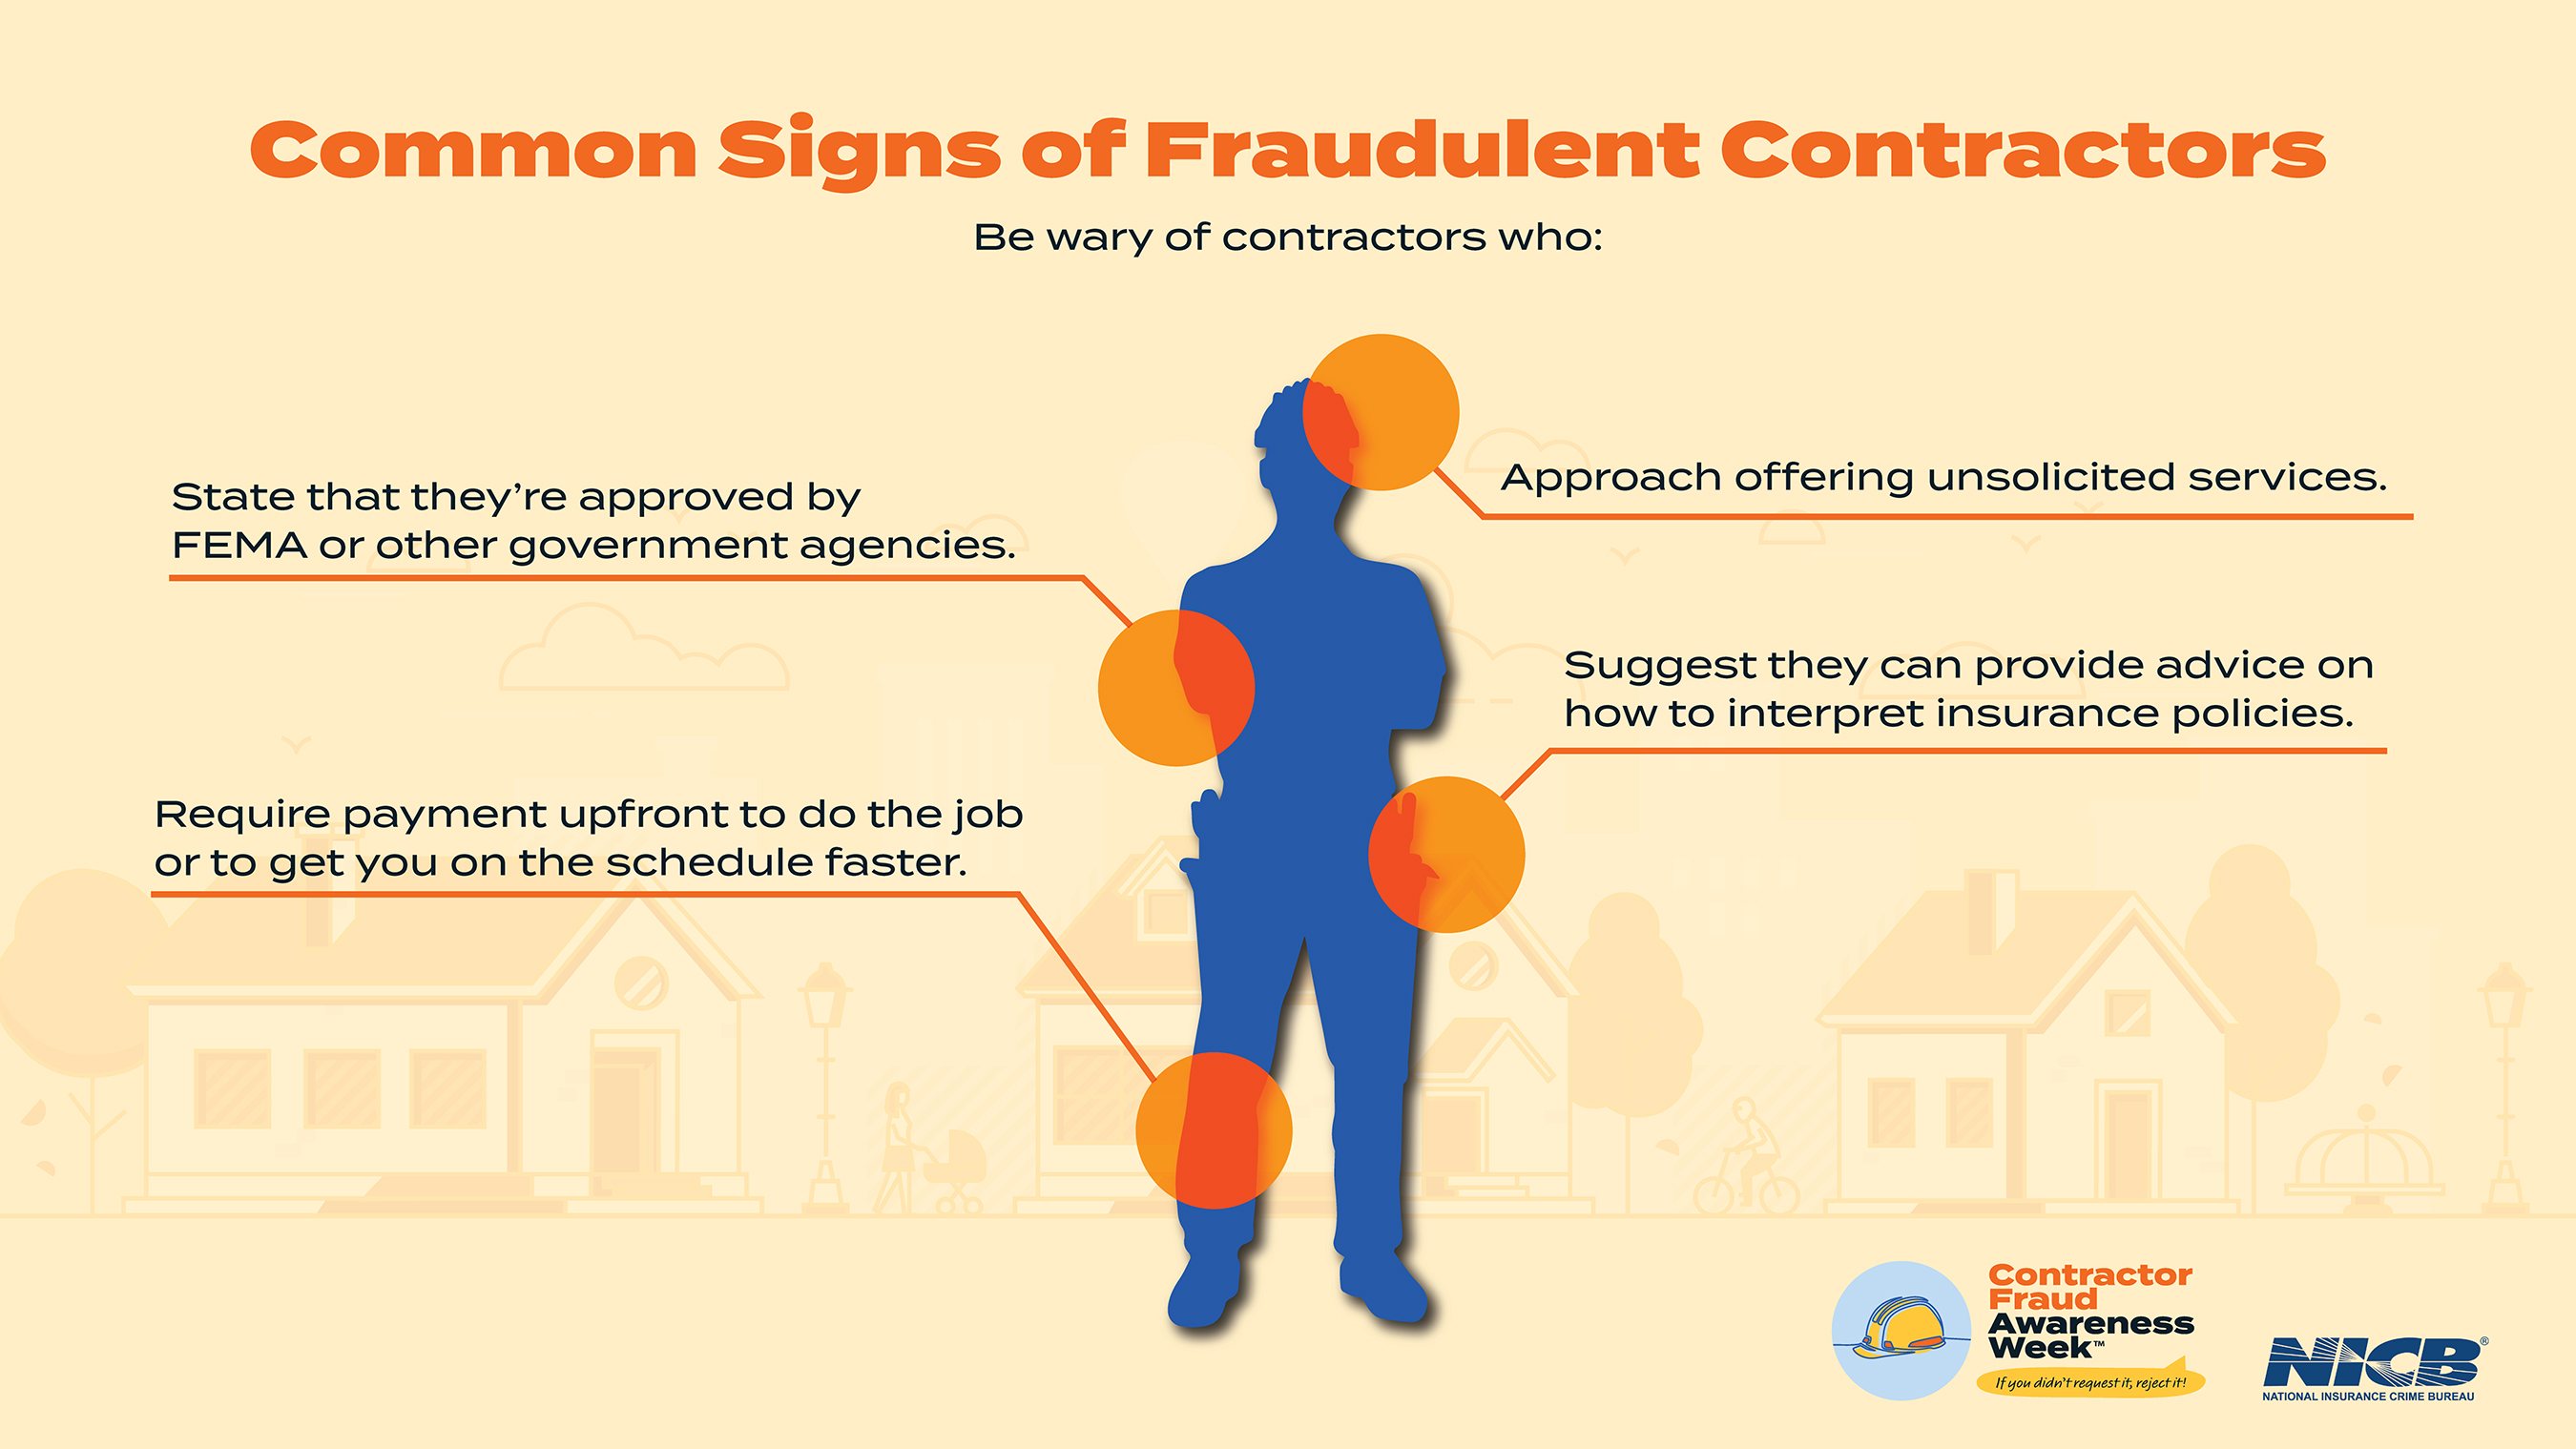 Fraudulent contractors use well-rehearsed predatory practices. Knowing what to look for can help you spot a fraud.